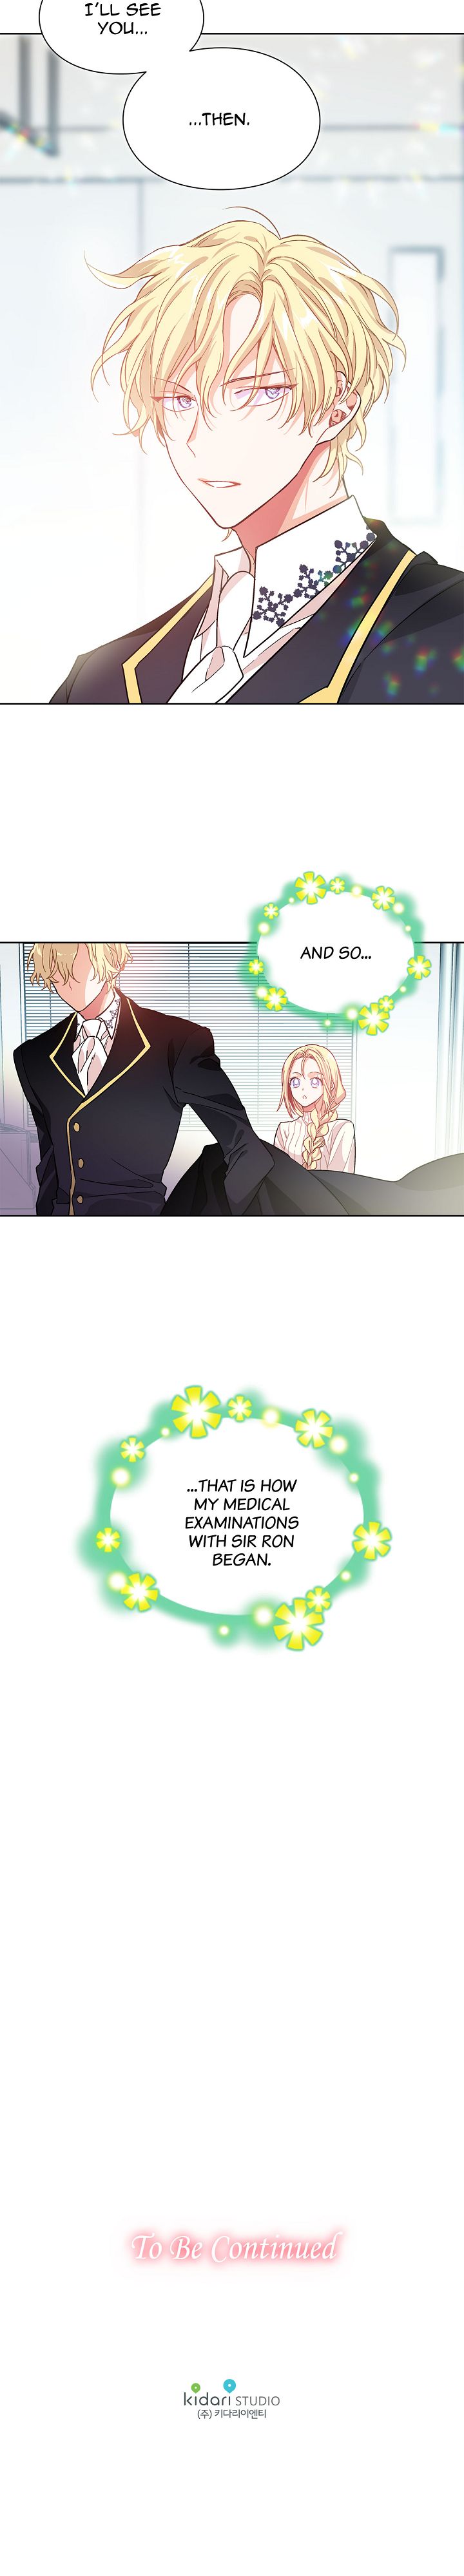 Doctor Elise - The Royal Lady with the Lamp - Chapter 27 Page 15